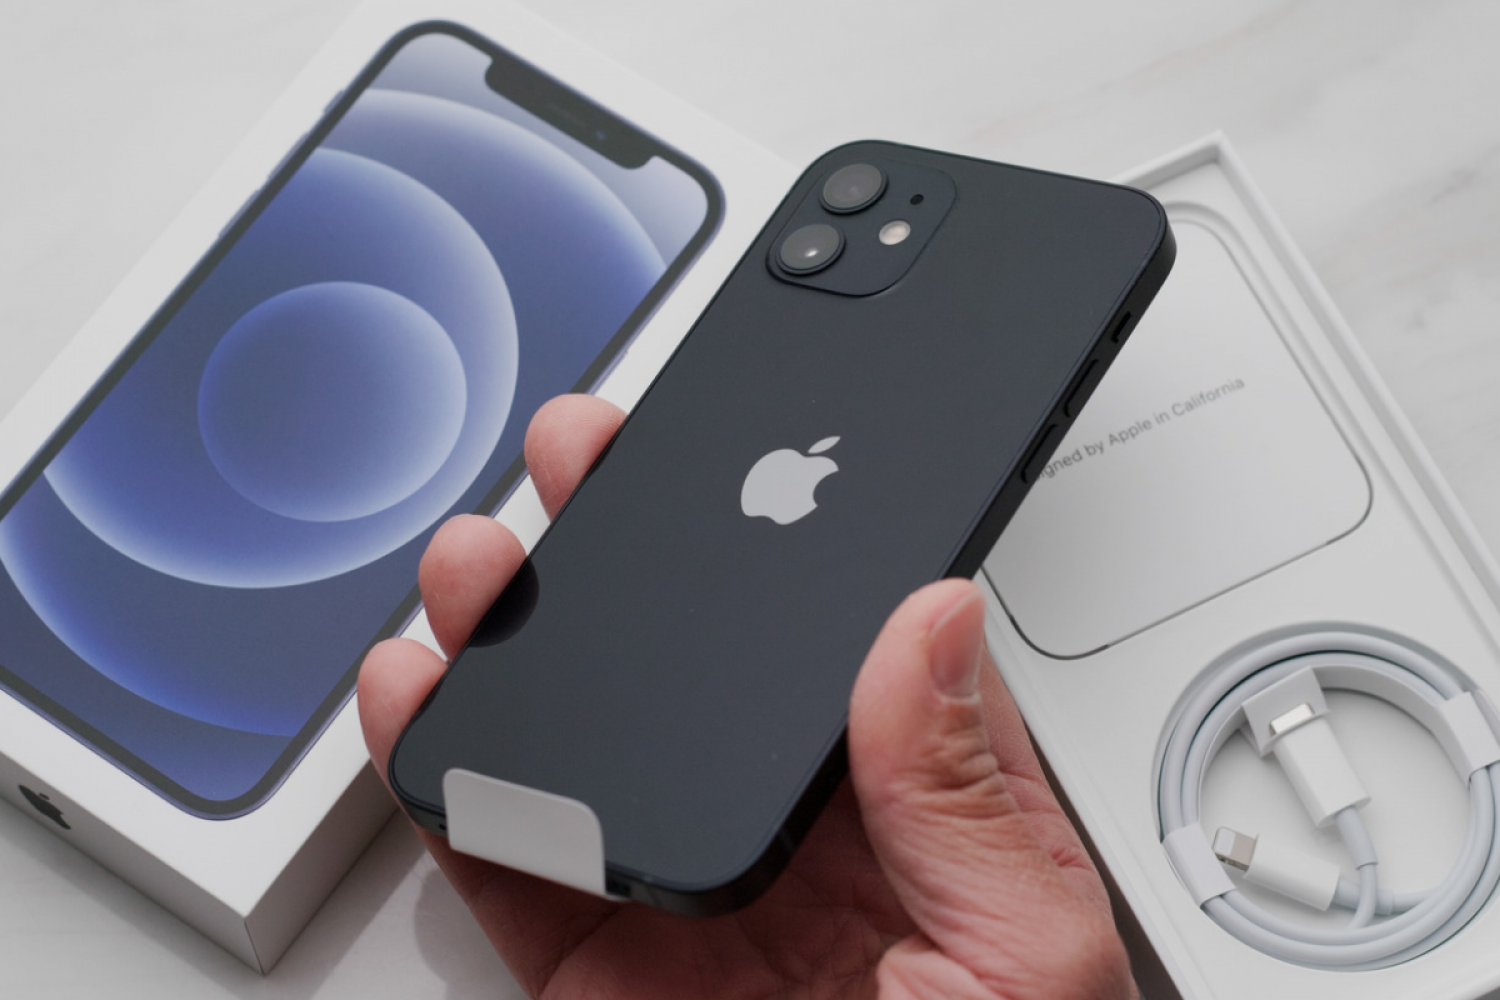 Which iPhone model will be discontinued updates in 2023?